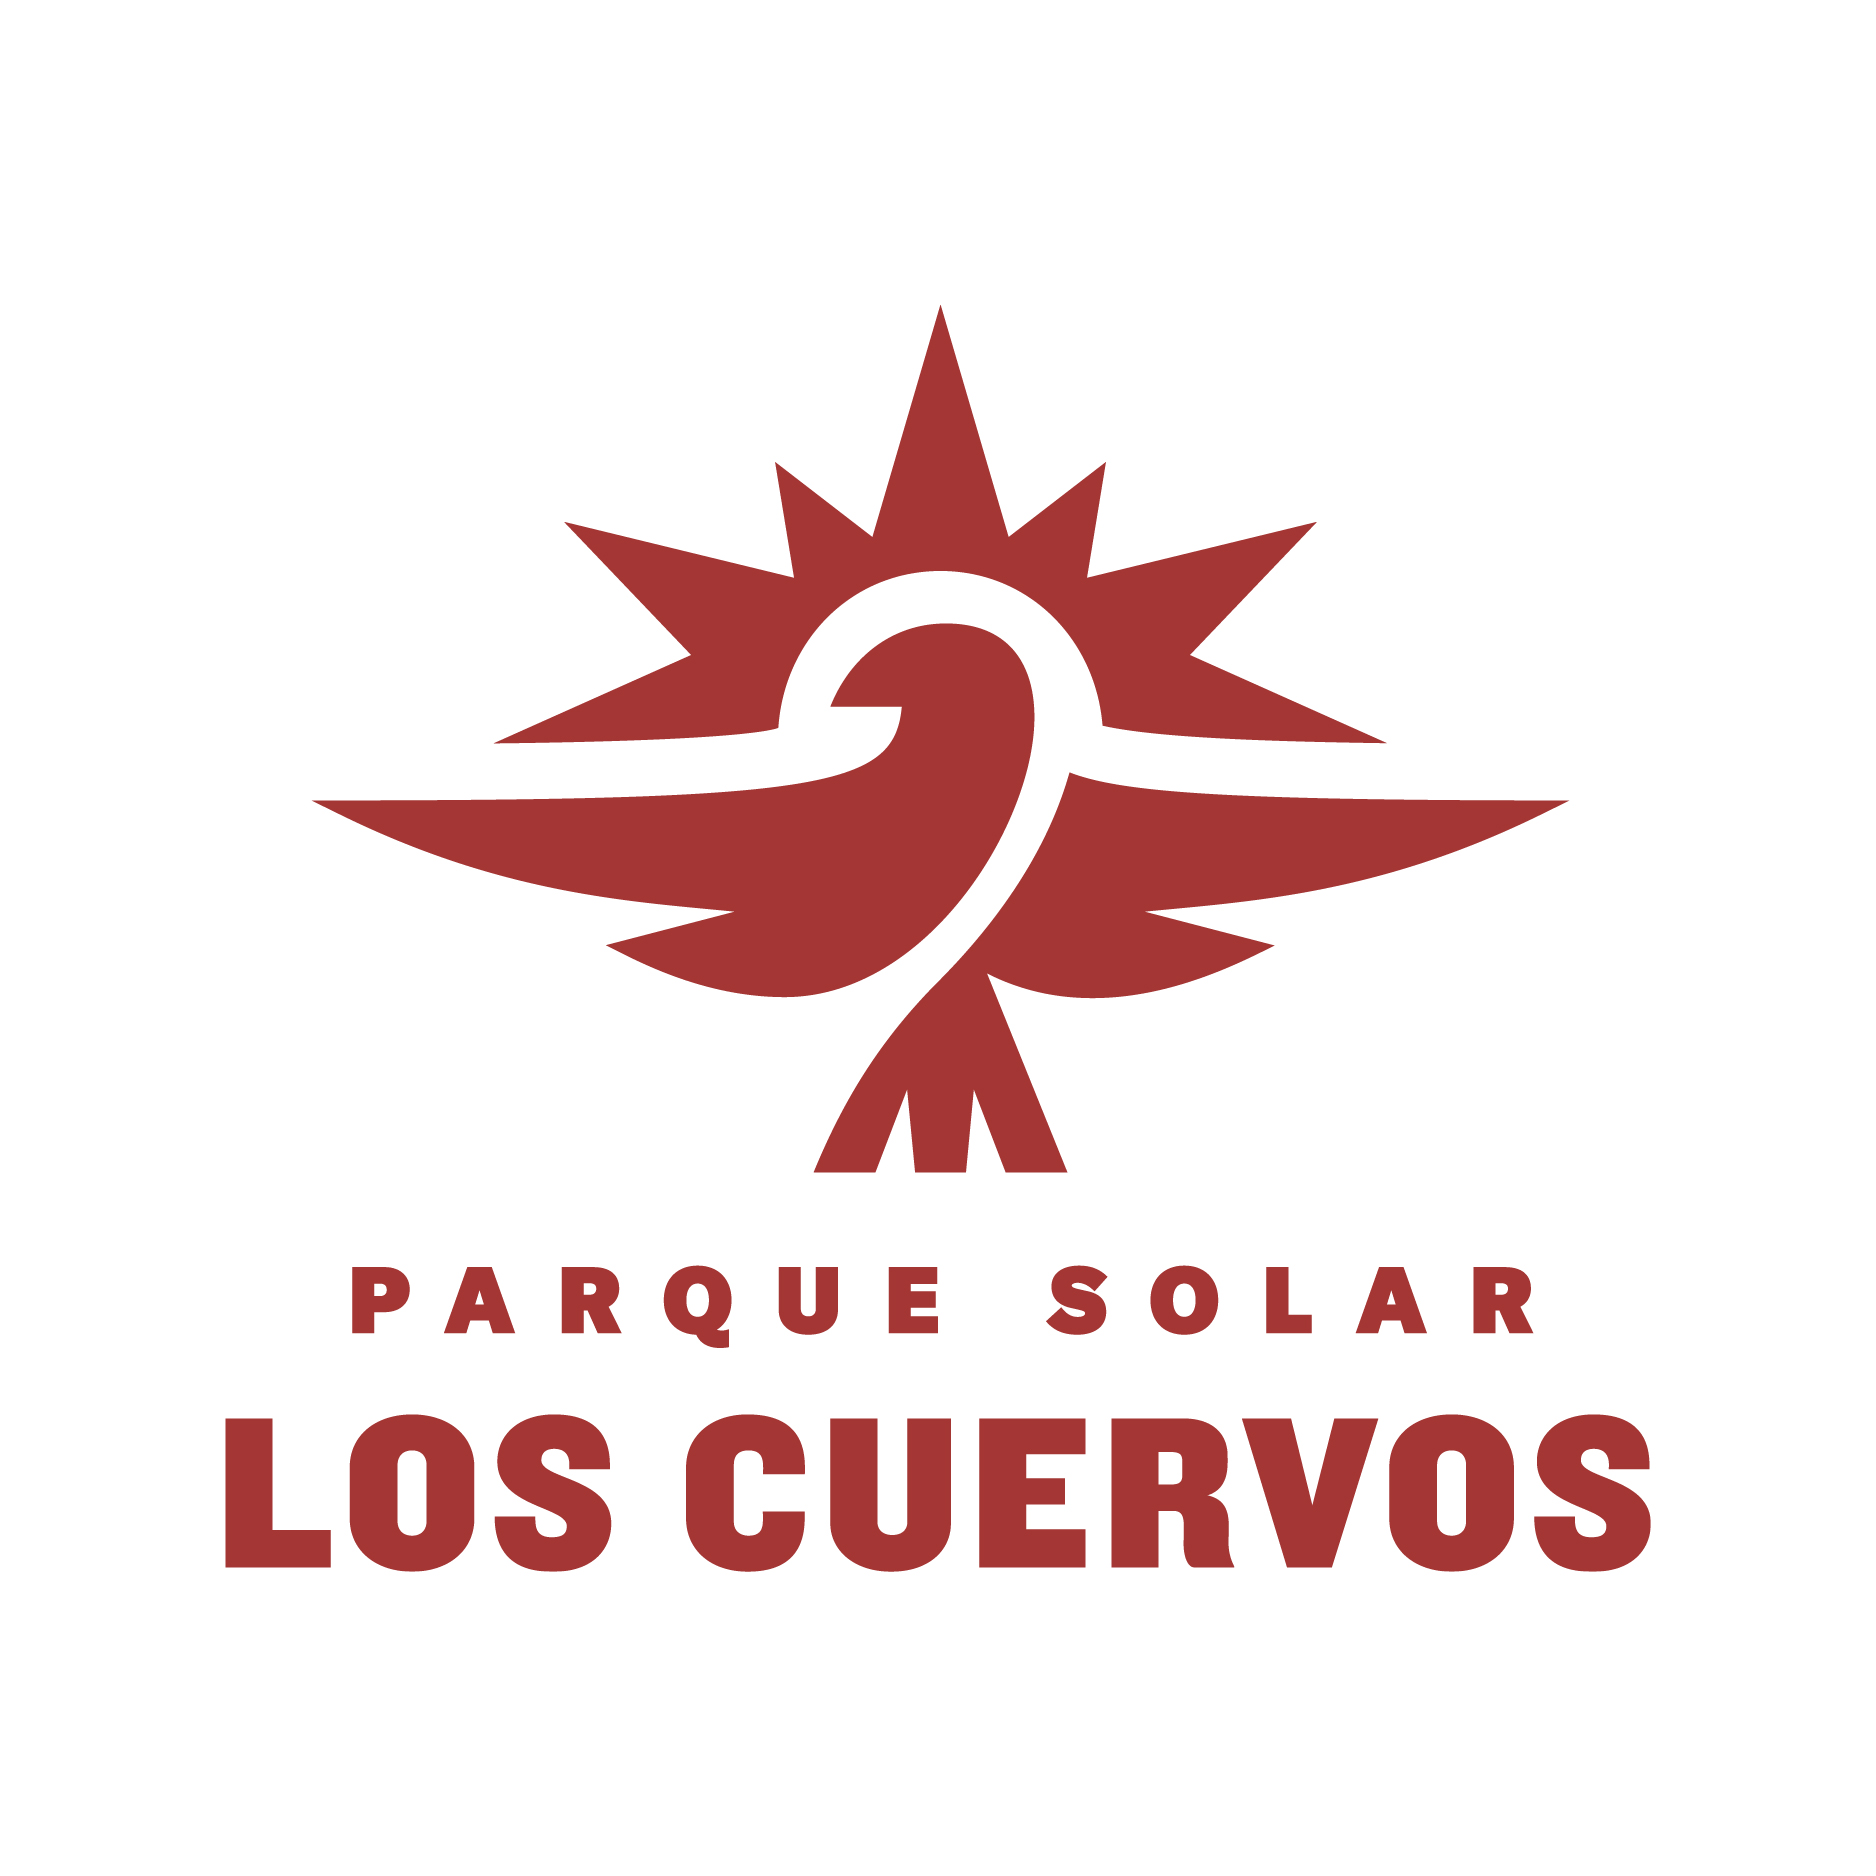 Los Cuervos Parque Solar - Primary logo design by logo designer Murmur Creative for your inspiration and for the worlds largest logo competition